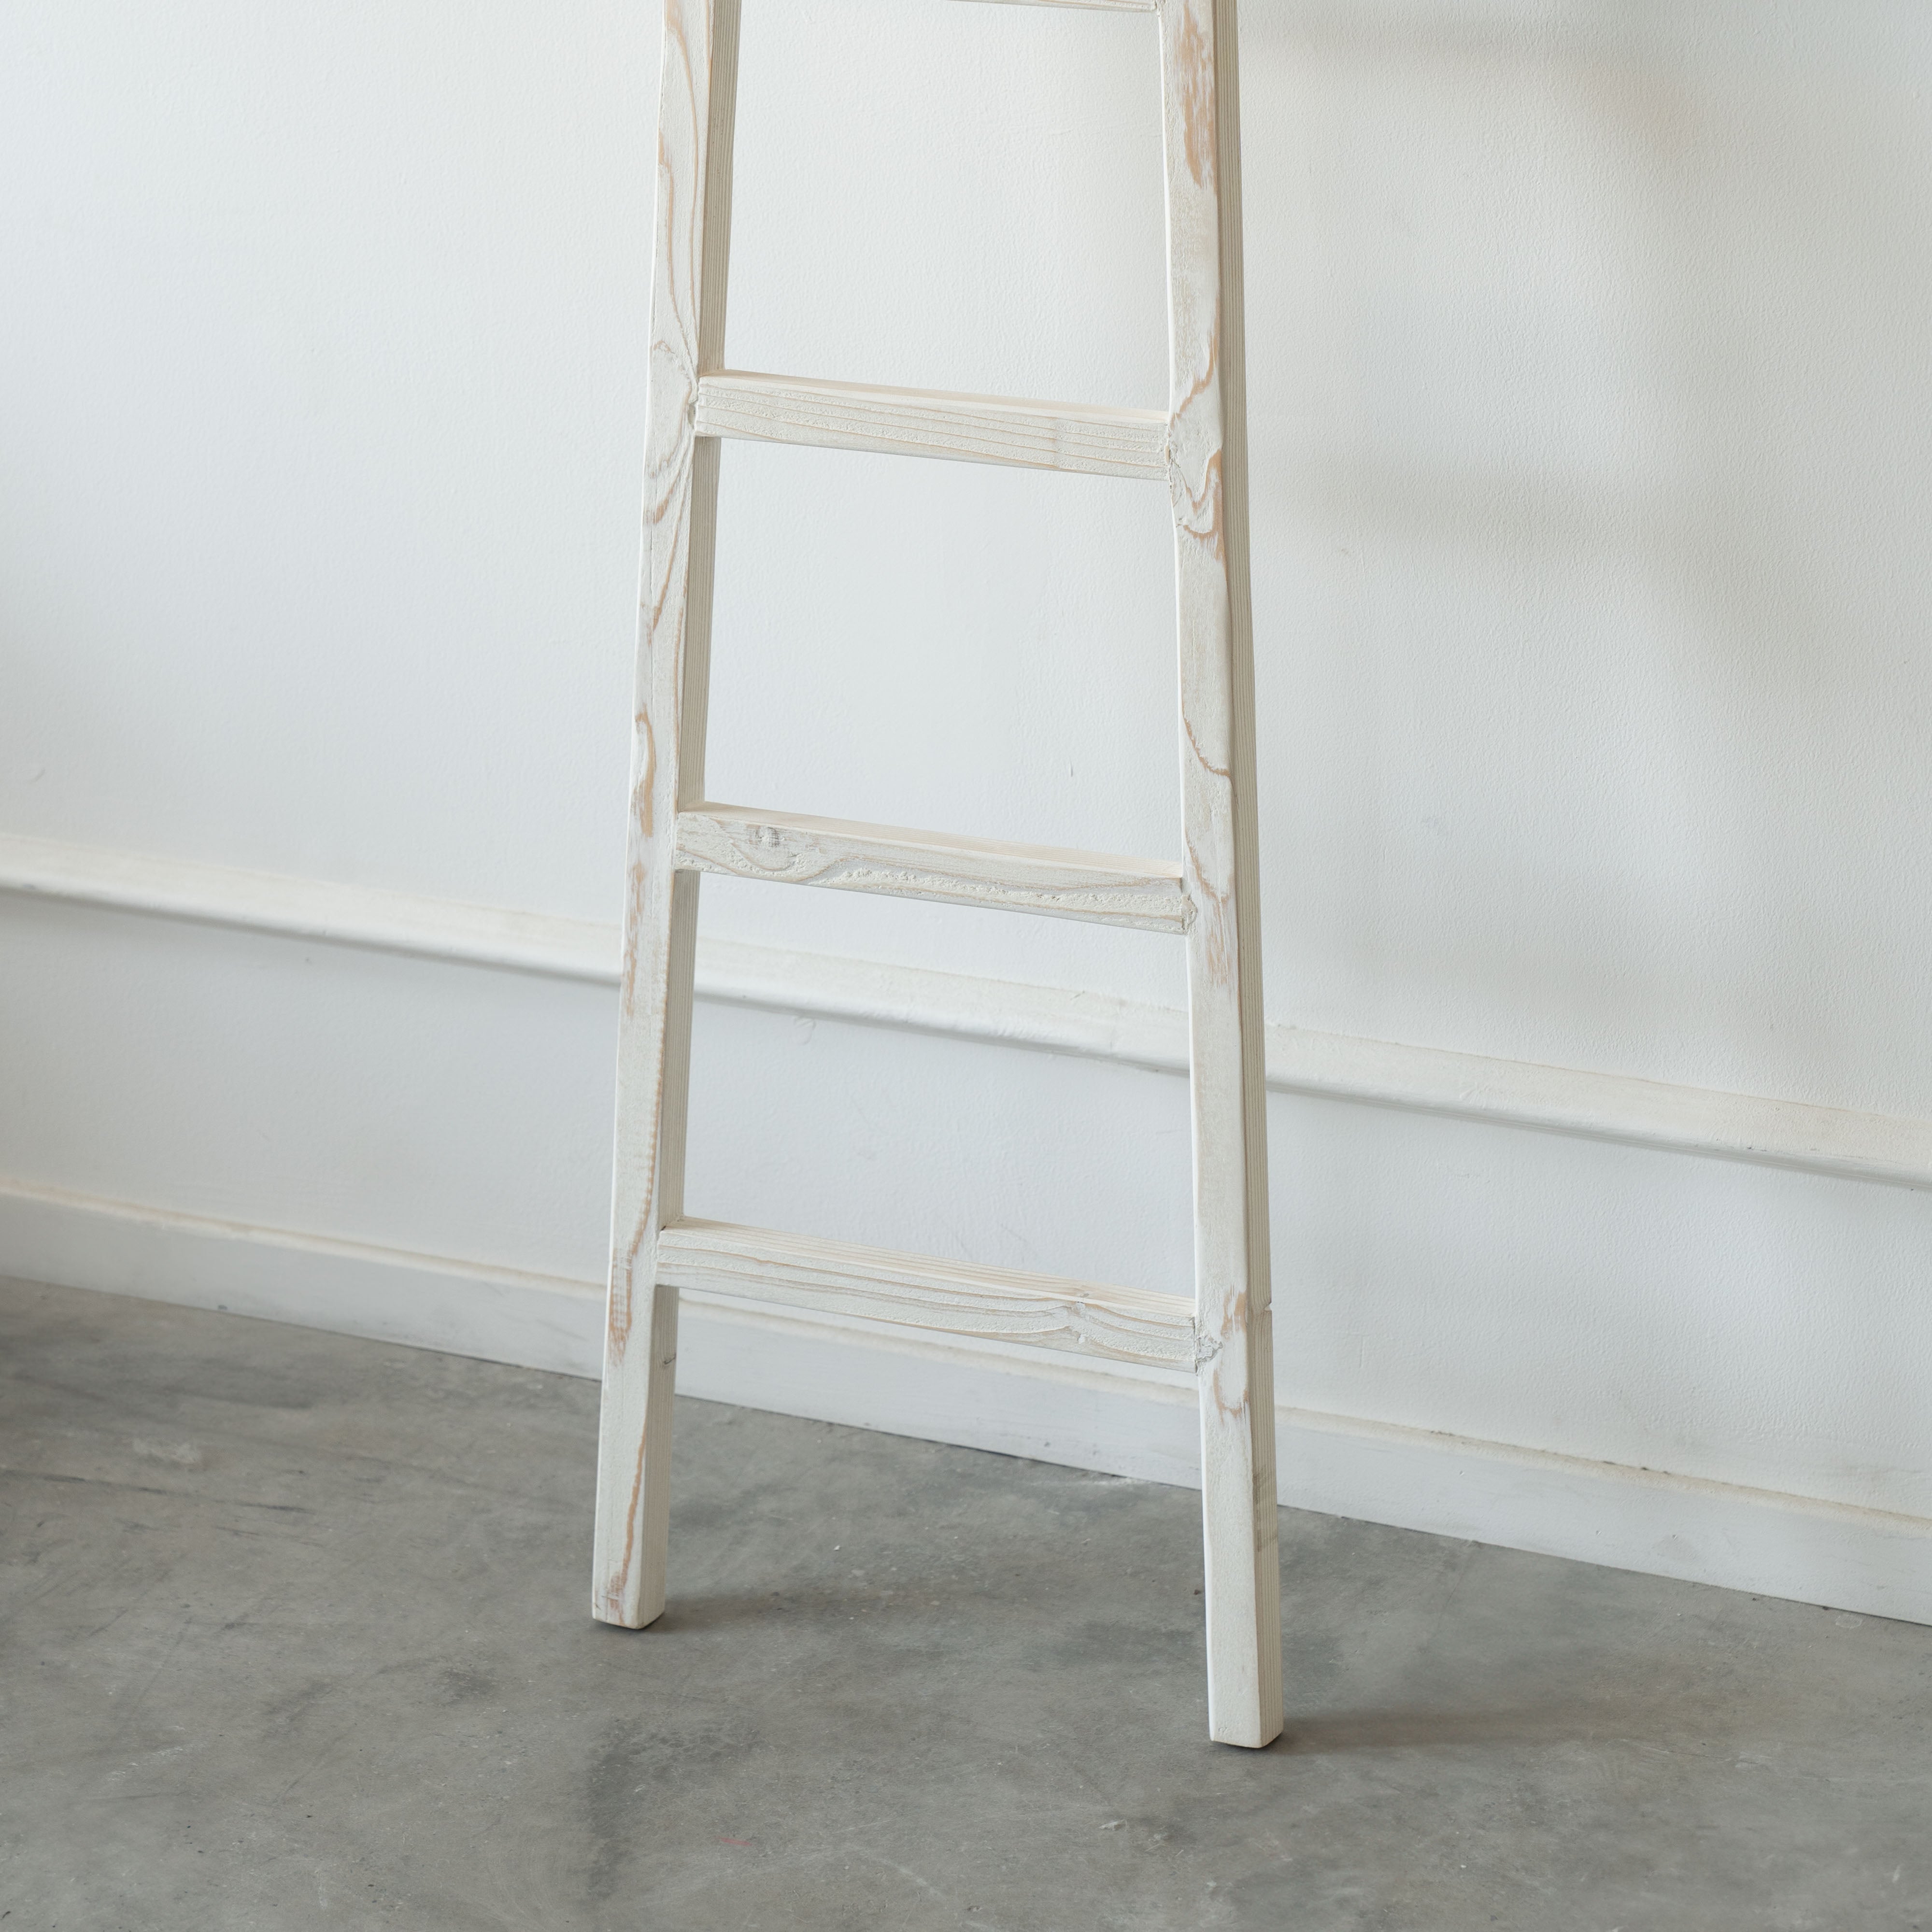 Ladder Lamp - Wood and Steel Furnitures